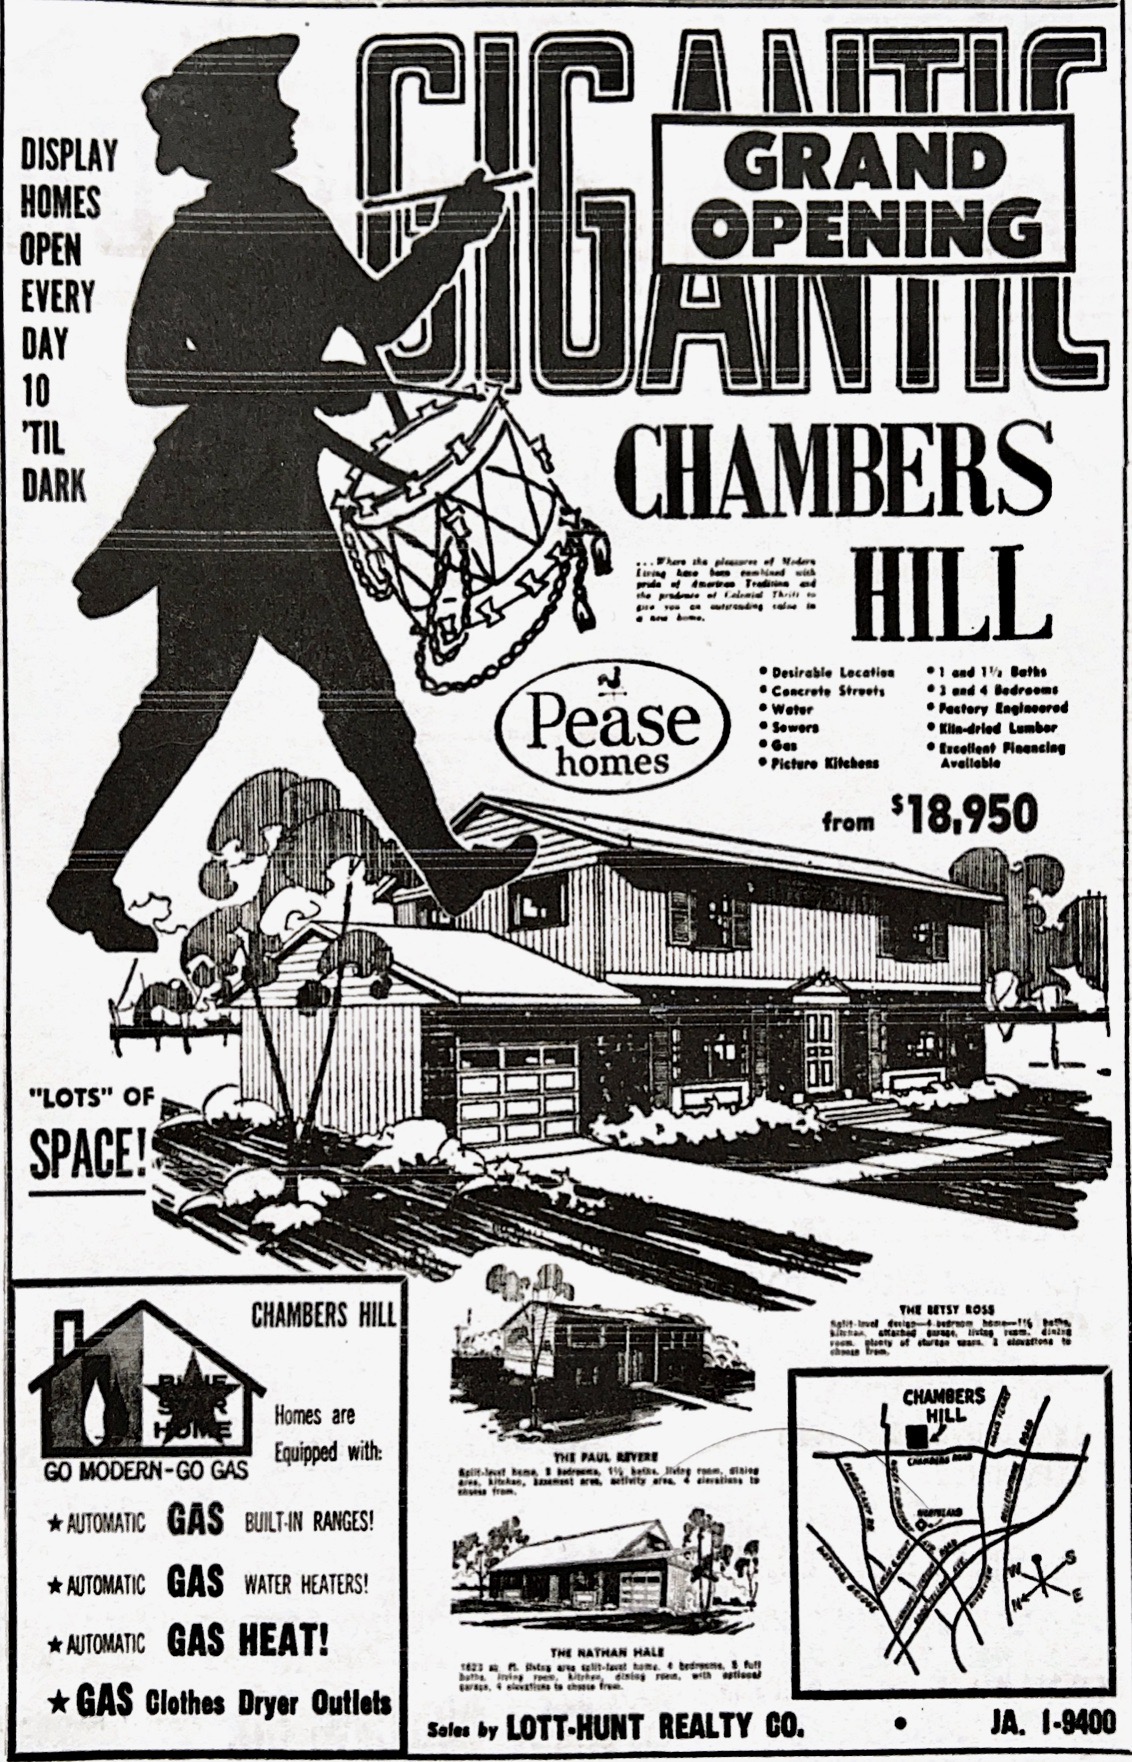 Chambers Hill promotional ad. St. Louis Post-Dispatch, July 29,1962